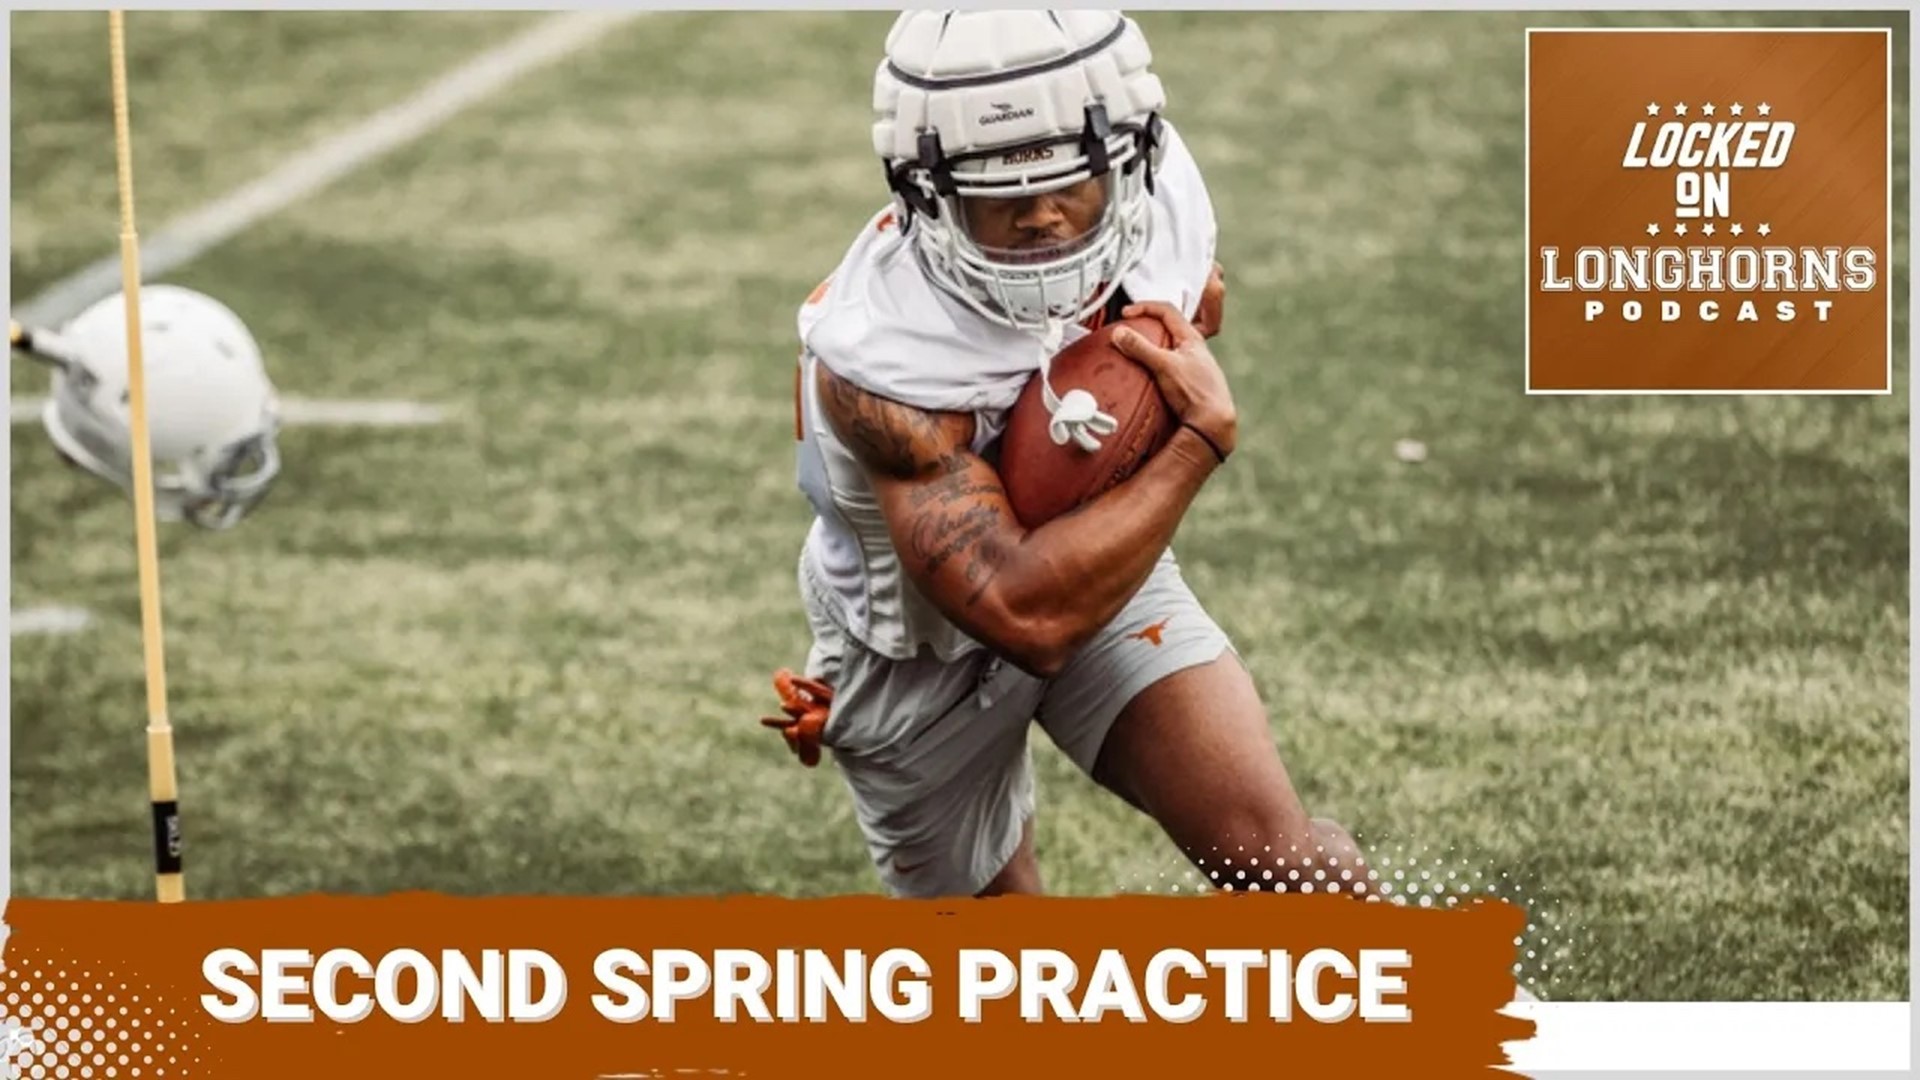 The Texas Longhorns Football Team completed their second spring practice and we continue to hear rave reviews about the most important position on the field.